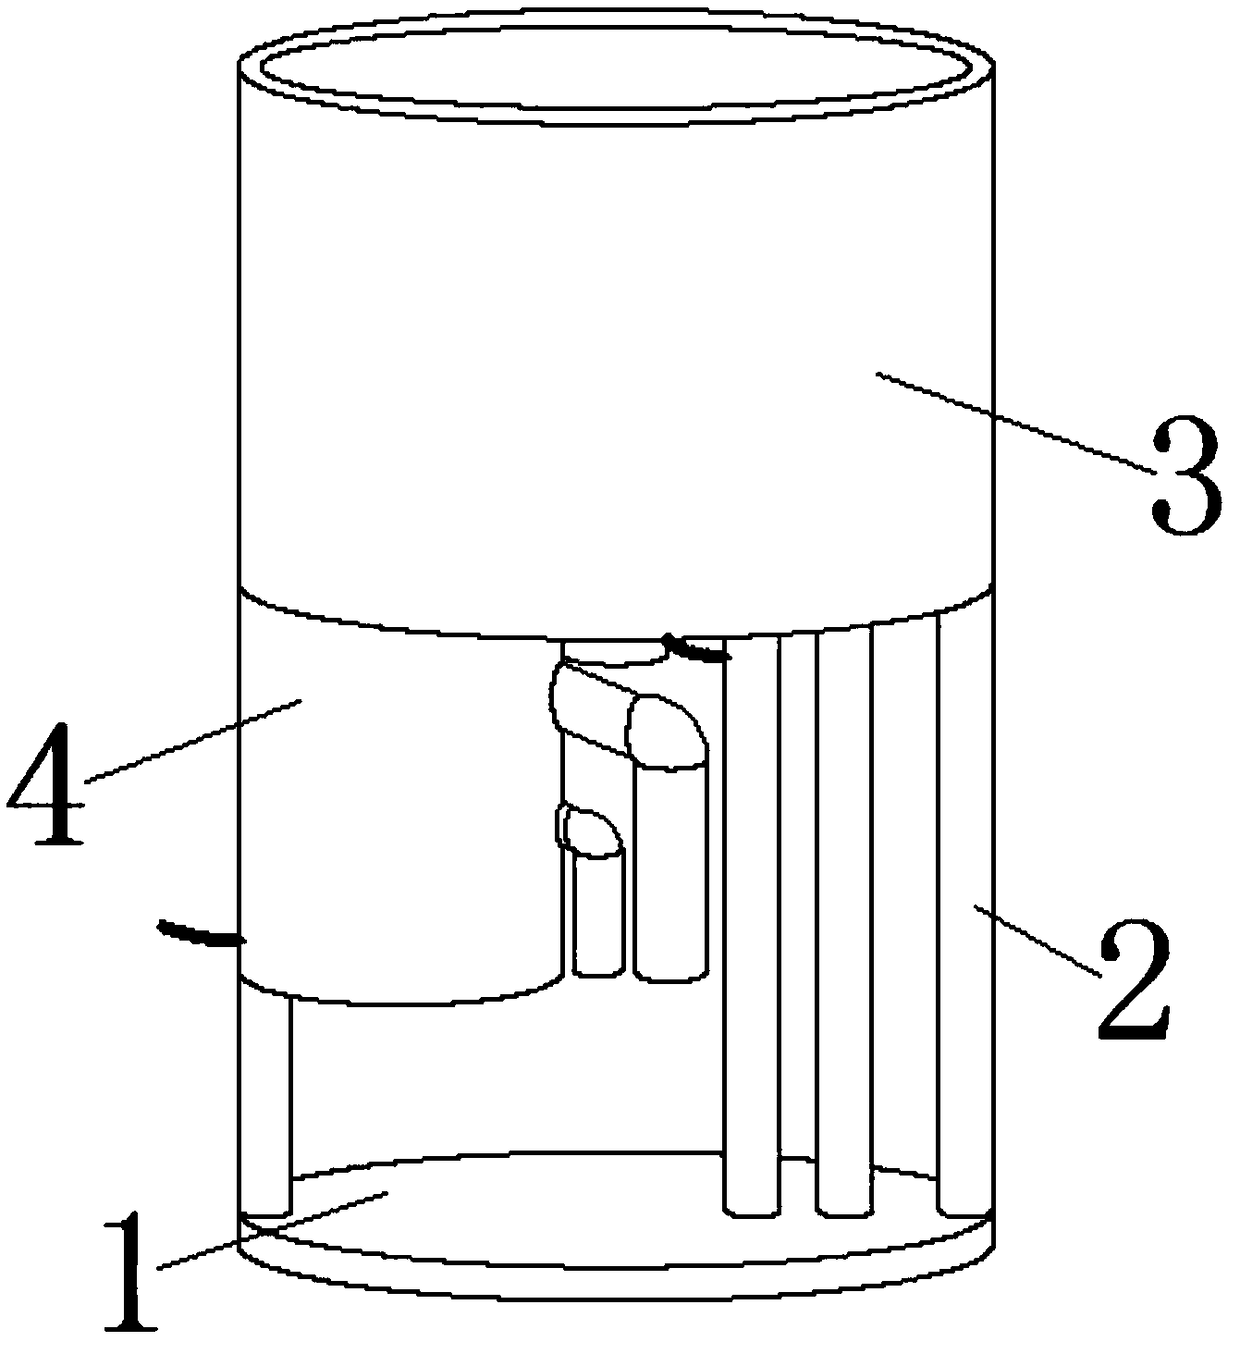 Apple screening device using centrifugal force for controlling screening